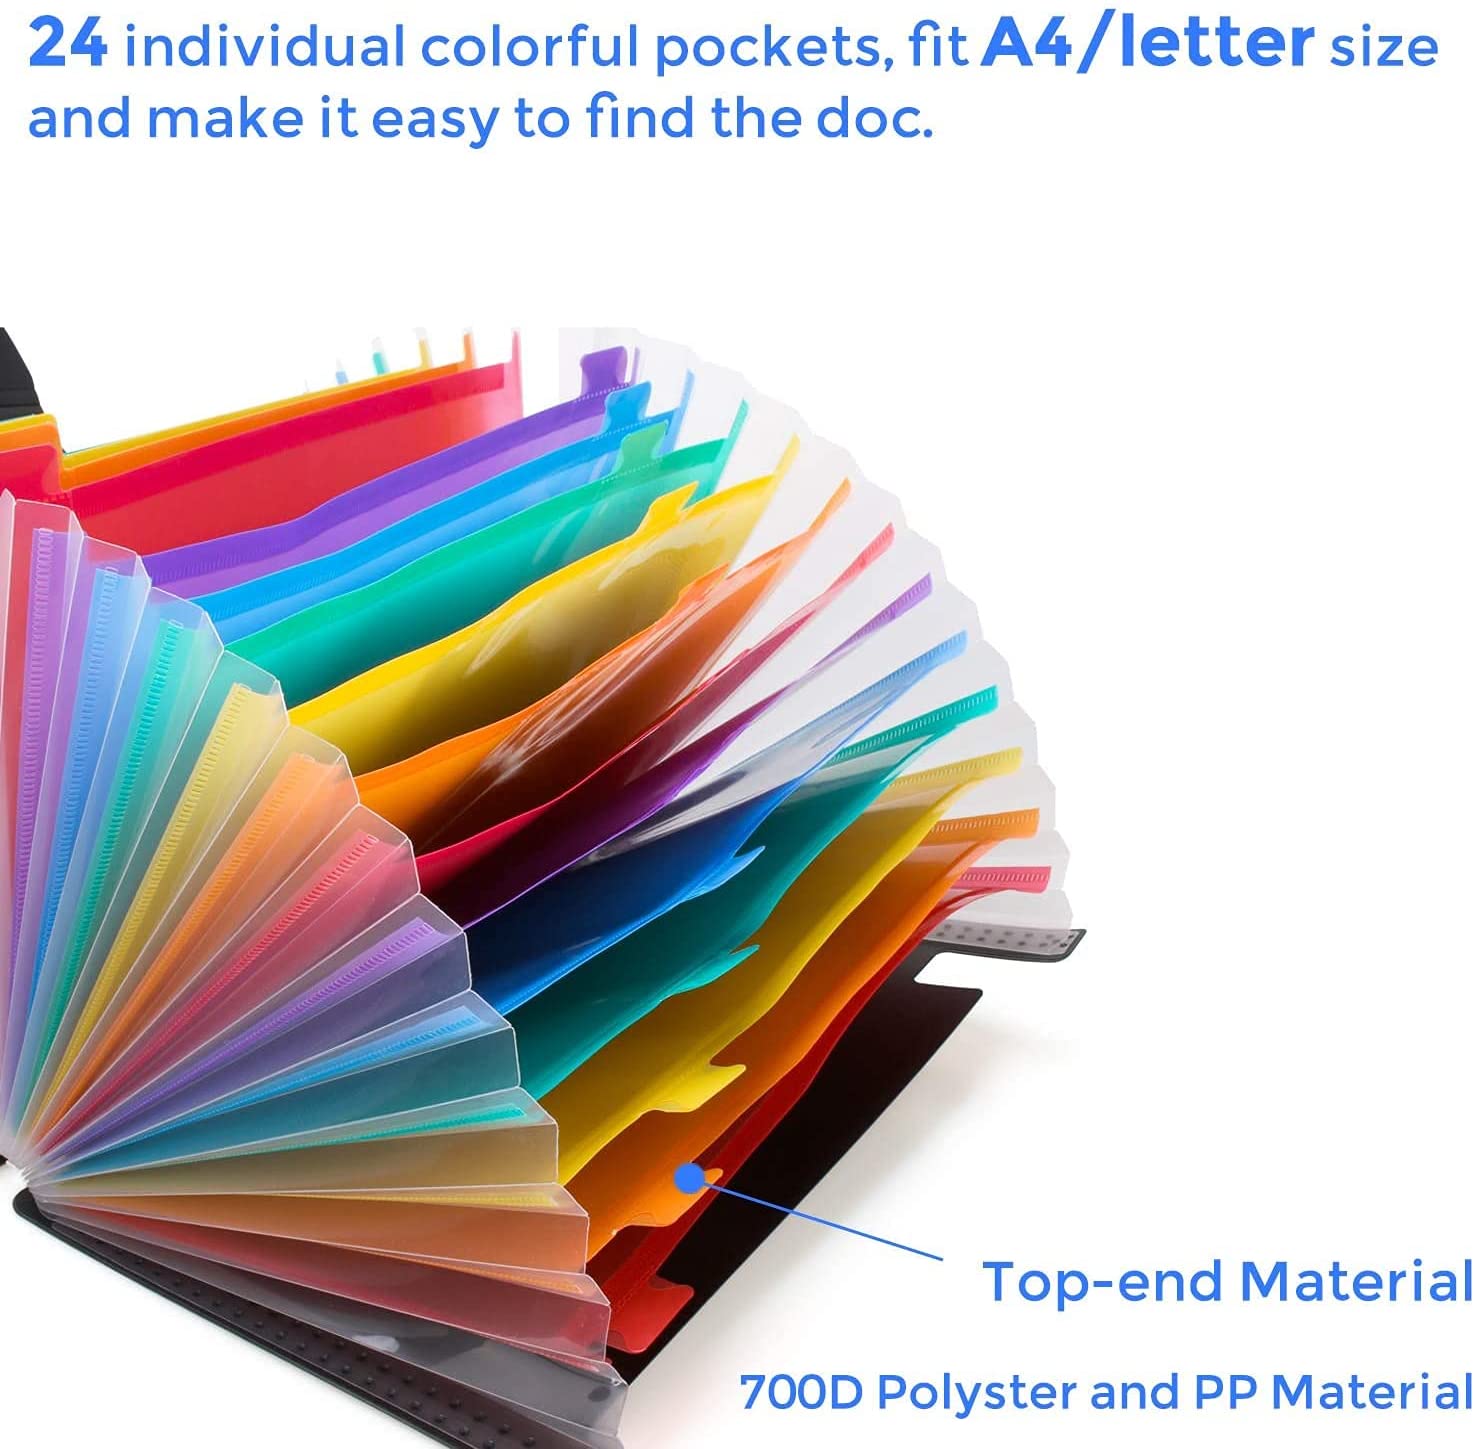 Expandable File Organiser with Cover Expanding File Folder Portable A4 Accordion Folder Xndryan 24 Pockets File Organisers Rainbow Office Folders to Classify and Organize Files